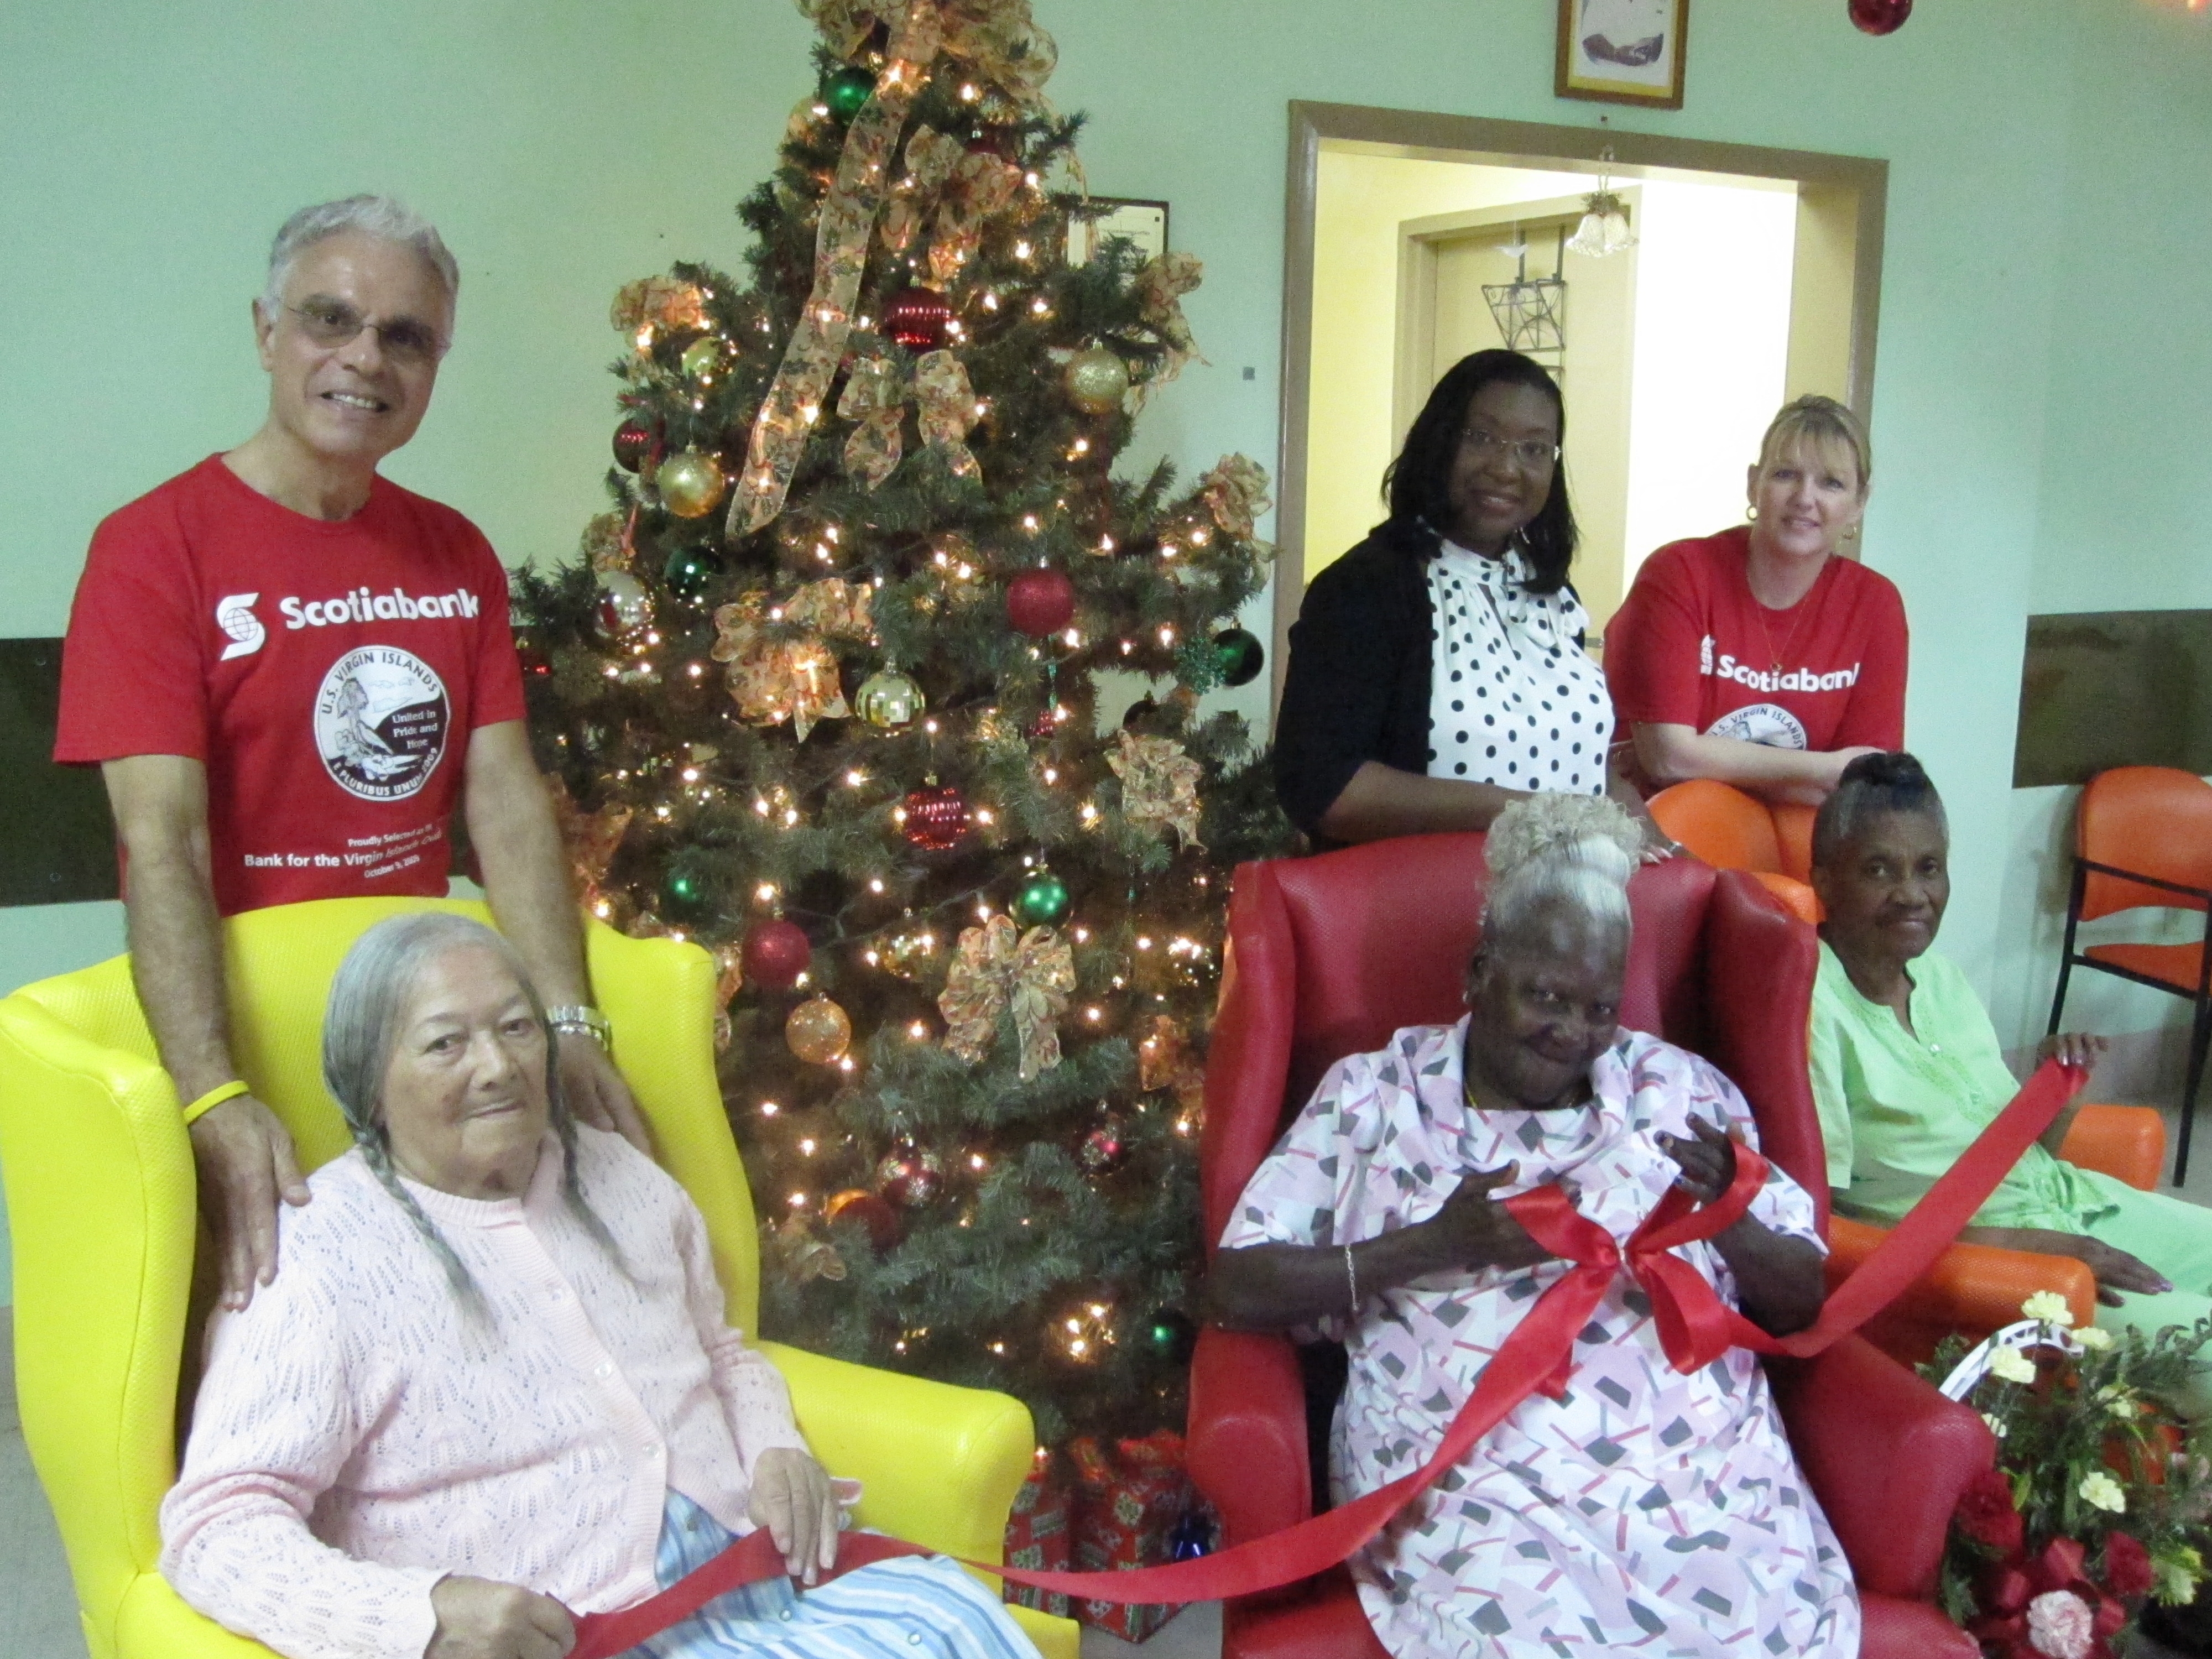 esidents and staff of the Queen Louise Home and Scotibank. Front Row from left: Irma Marsh, Meryl Percell, Dorcia Waters. Back Row from left: Andrew Kresh, Ernie Pennyfeather, Kelly Morgan